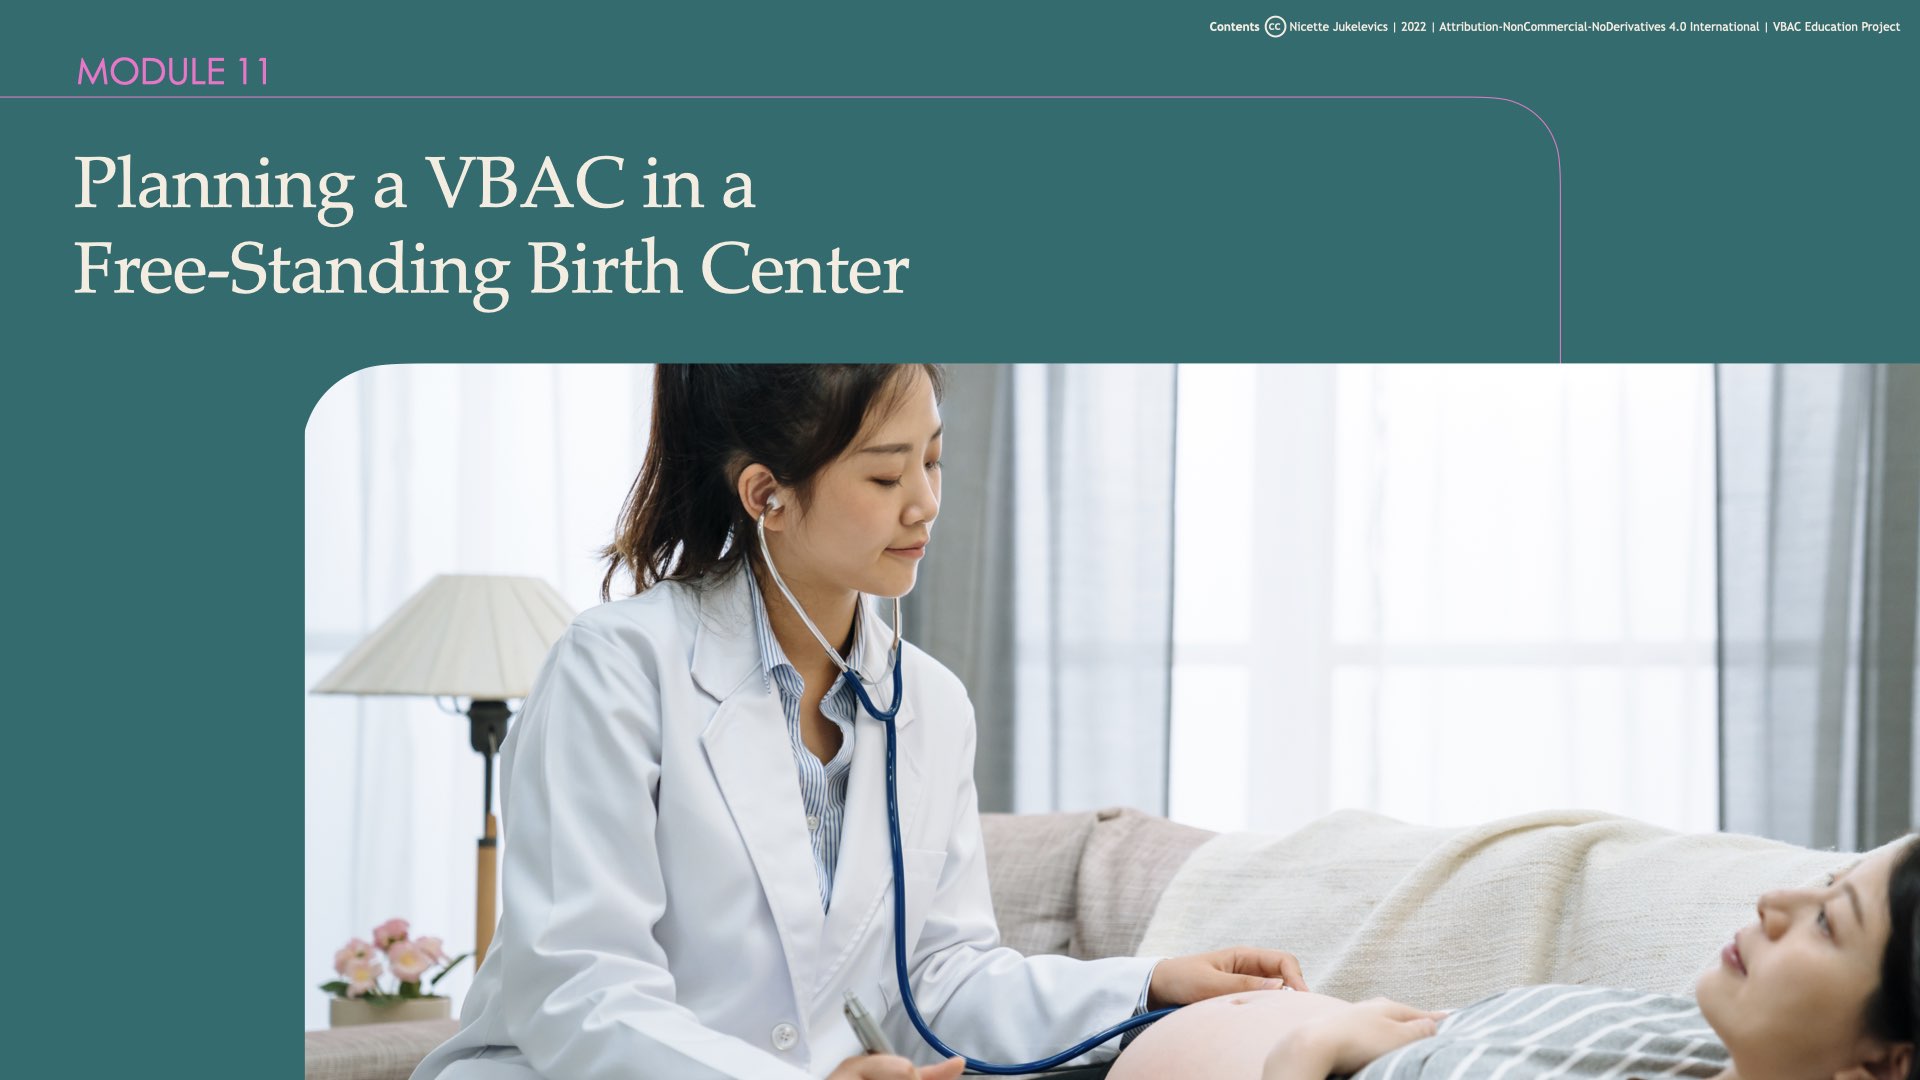 Module 11: Planning a VBAC in a Free-Standing Birth Center